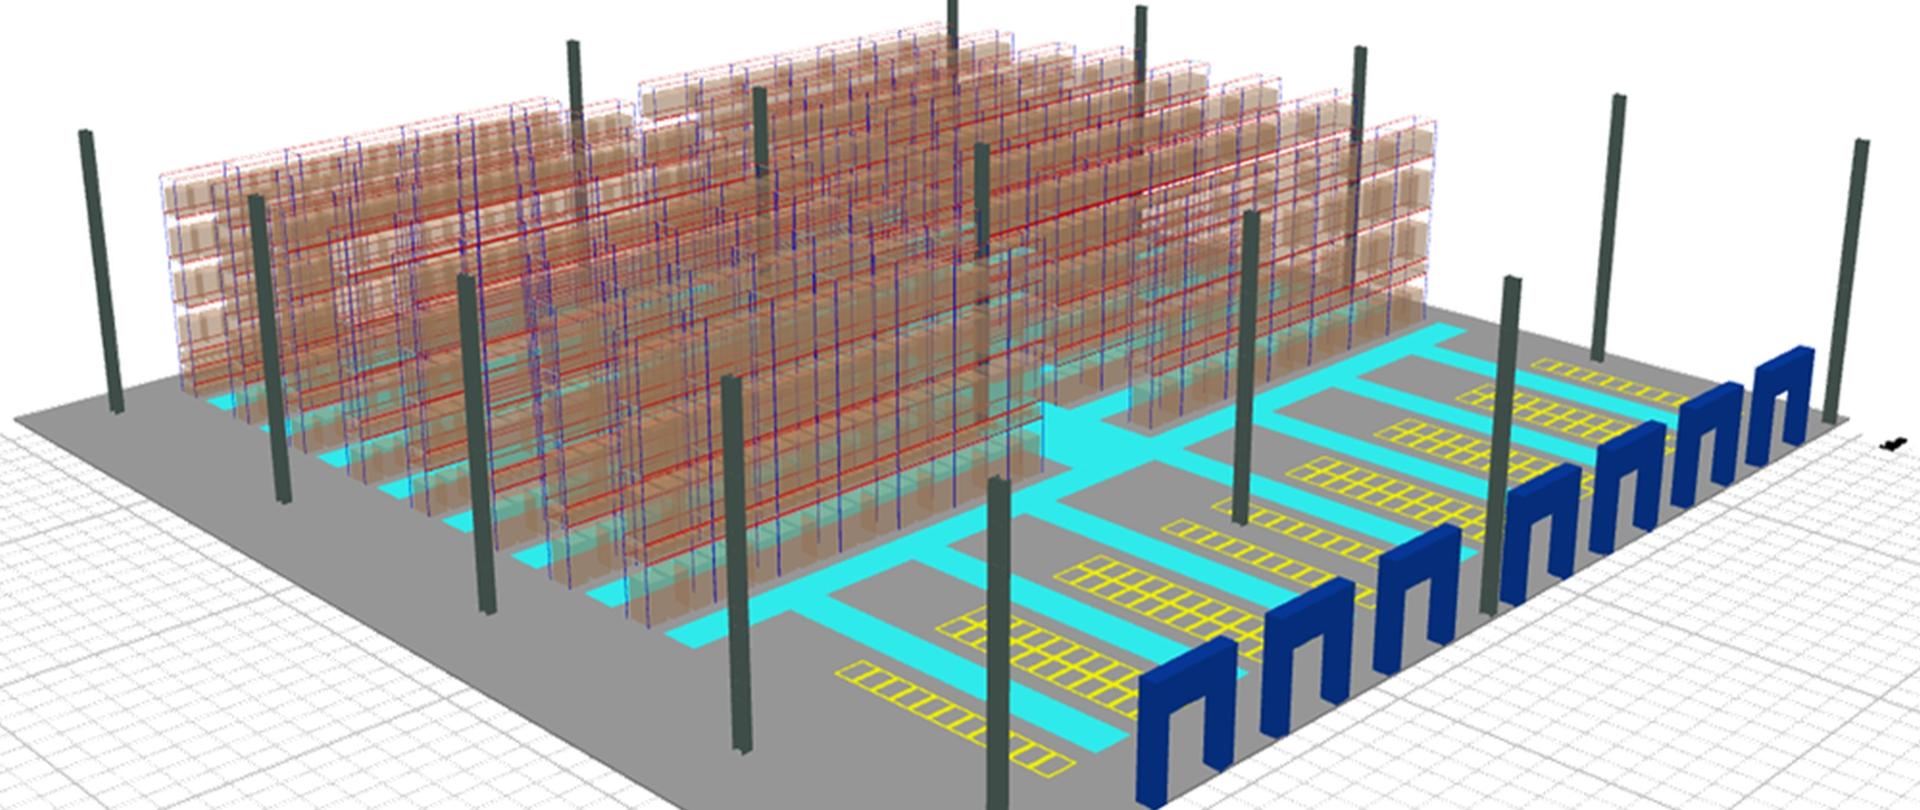 Visualization of the project in the SIMMAG3D system. Square warehouse space. Gray floor with blue access paths and passages between shelves. Visible diagrams of entrances (navy blue), multi-storey shelves (red-brown-navy blue constructions) and supports (bronze)
